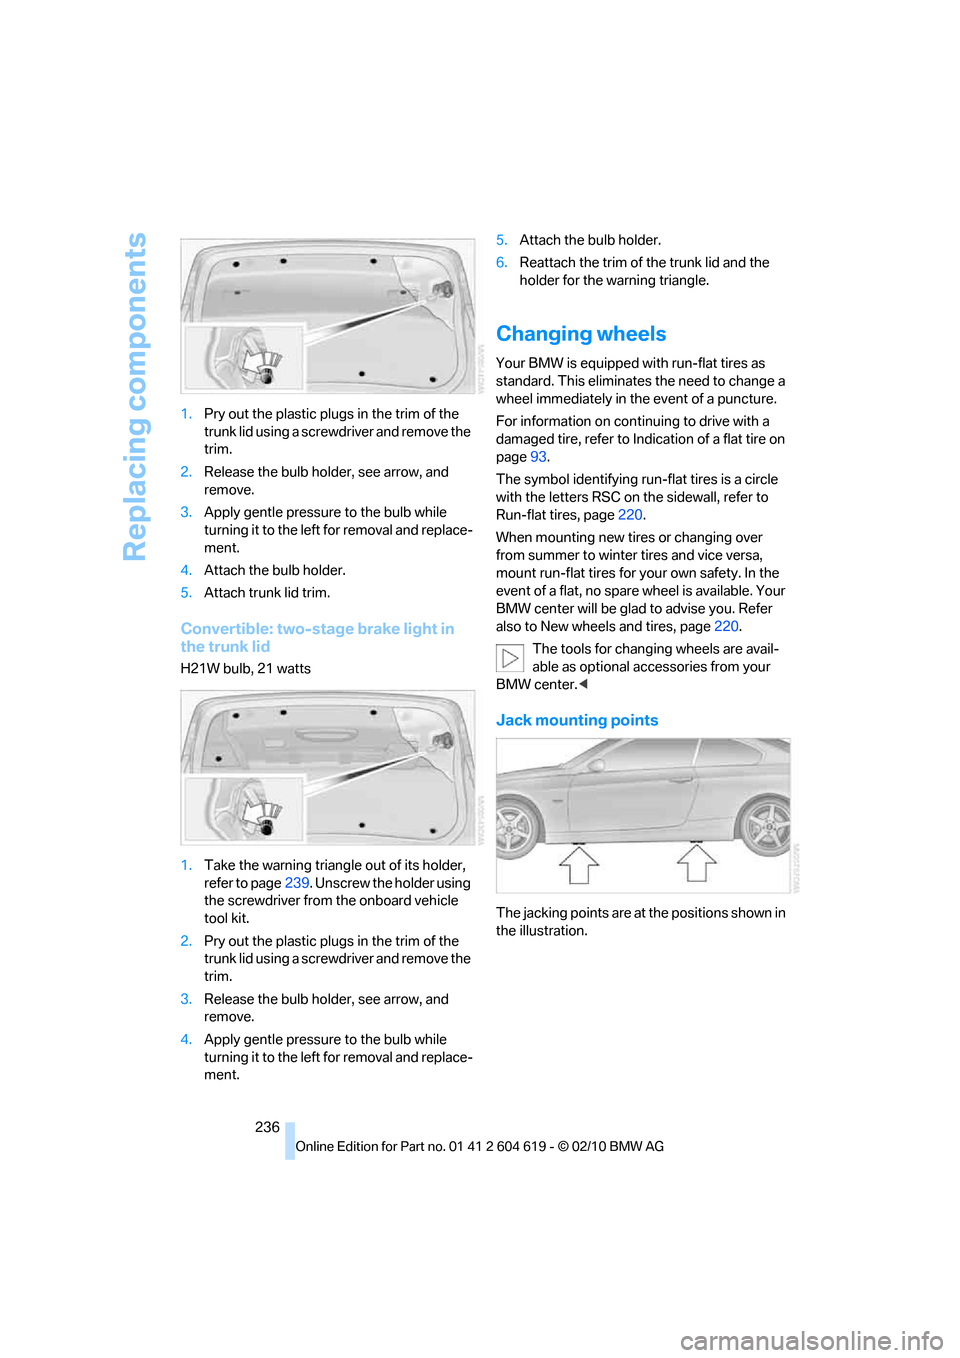 BMW 335I XDRIVE COUPE 2011 E93 Owners Manual Replacing components
236 1.Pry out the plastic plugs in the trim of the 
trunk lid using a screwdriver and remove the 
trim.
2.Release the bulb holder, see arrow, and 
remove.
3.Apply gentle pressure 